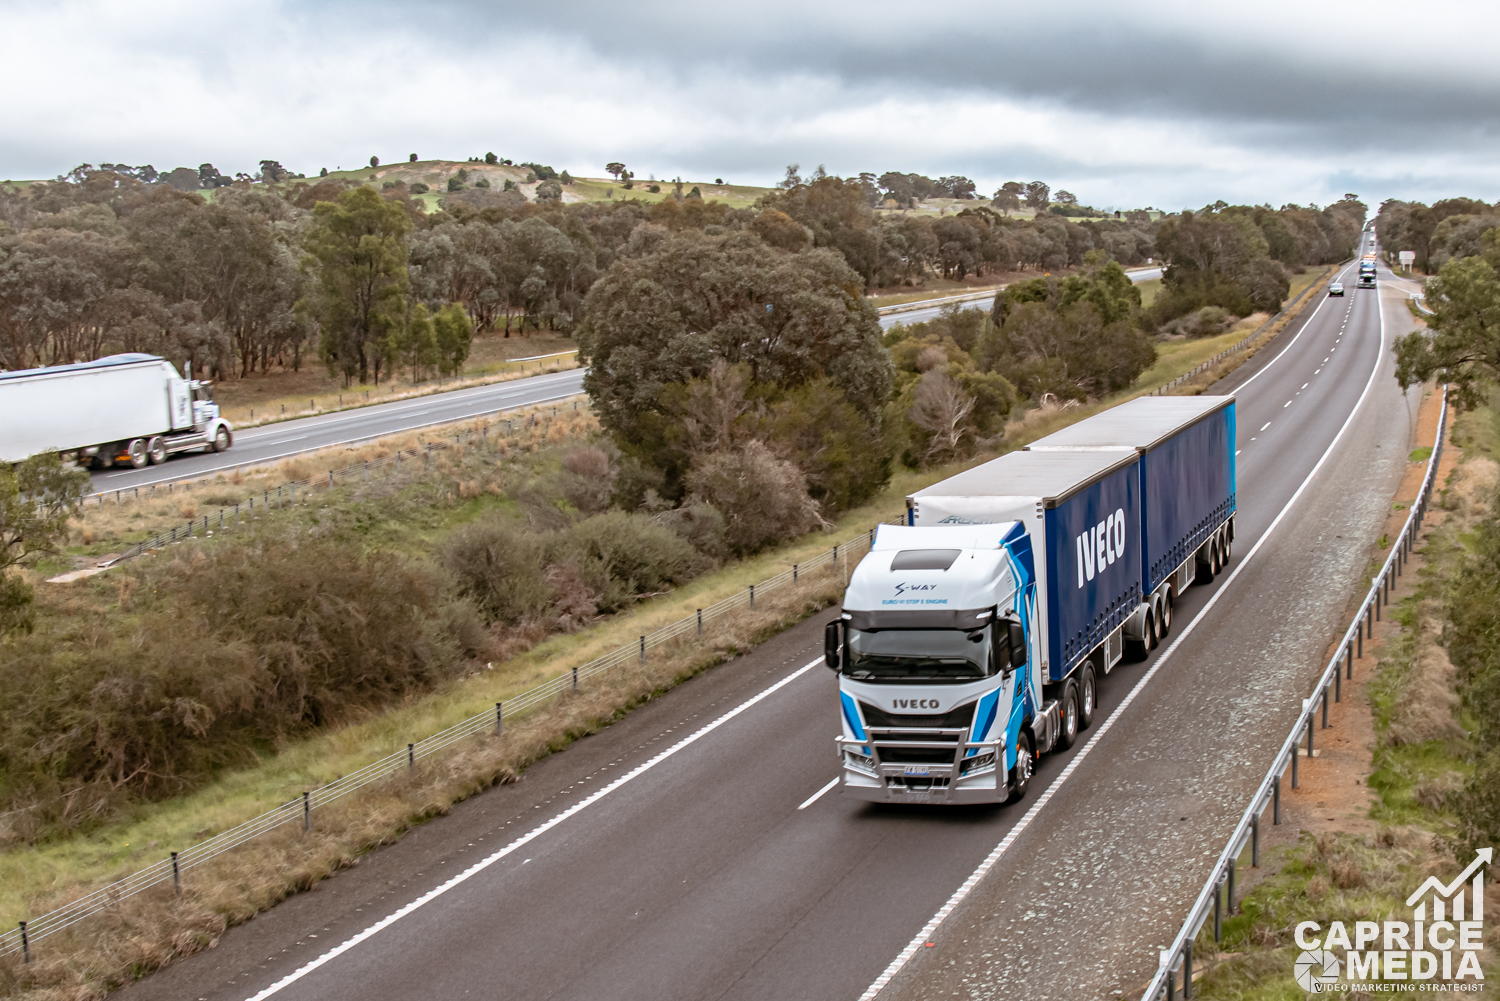 On the Move: Capturing the Motion and Energy of Trucks in Transit